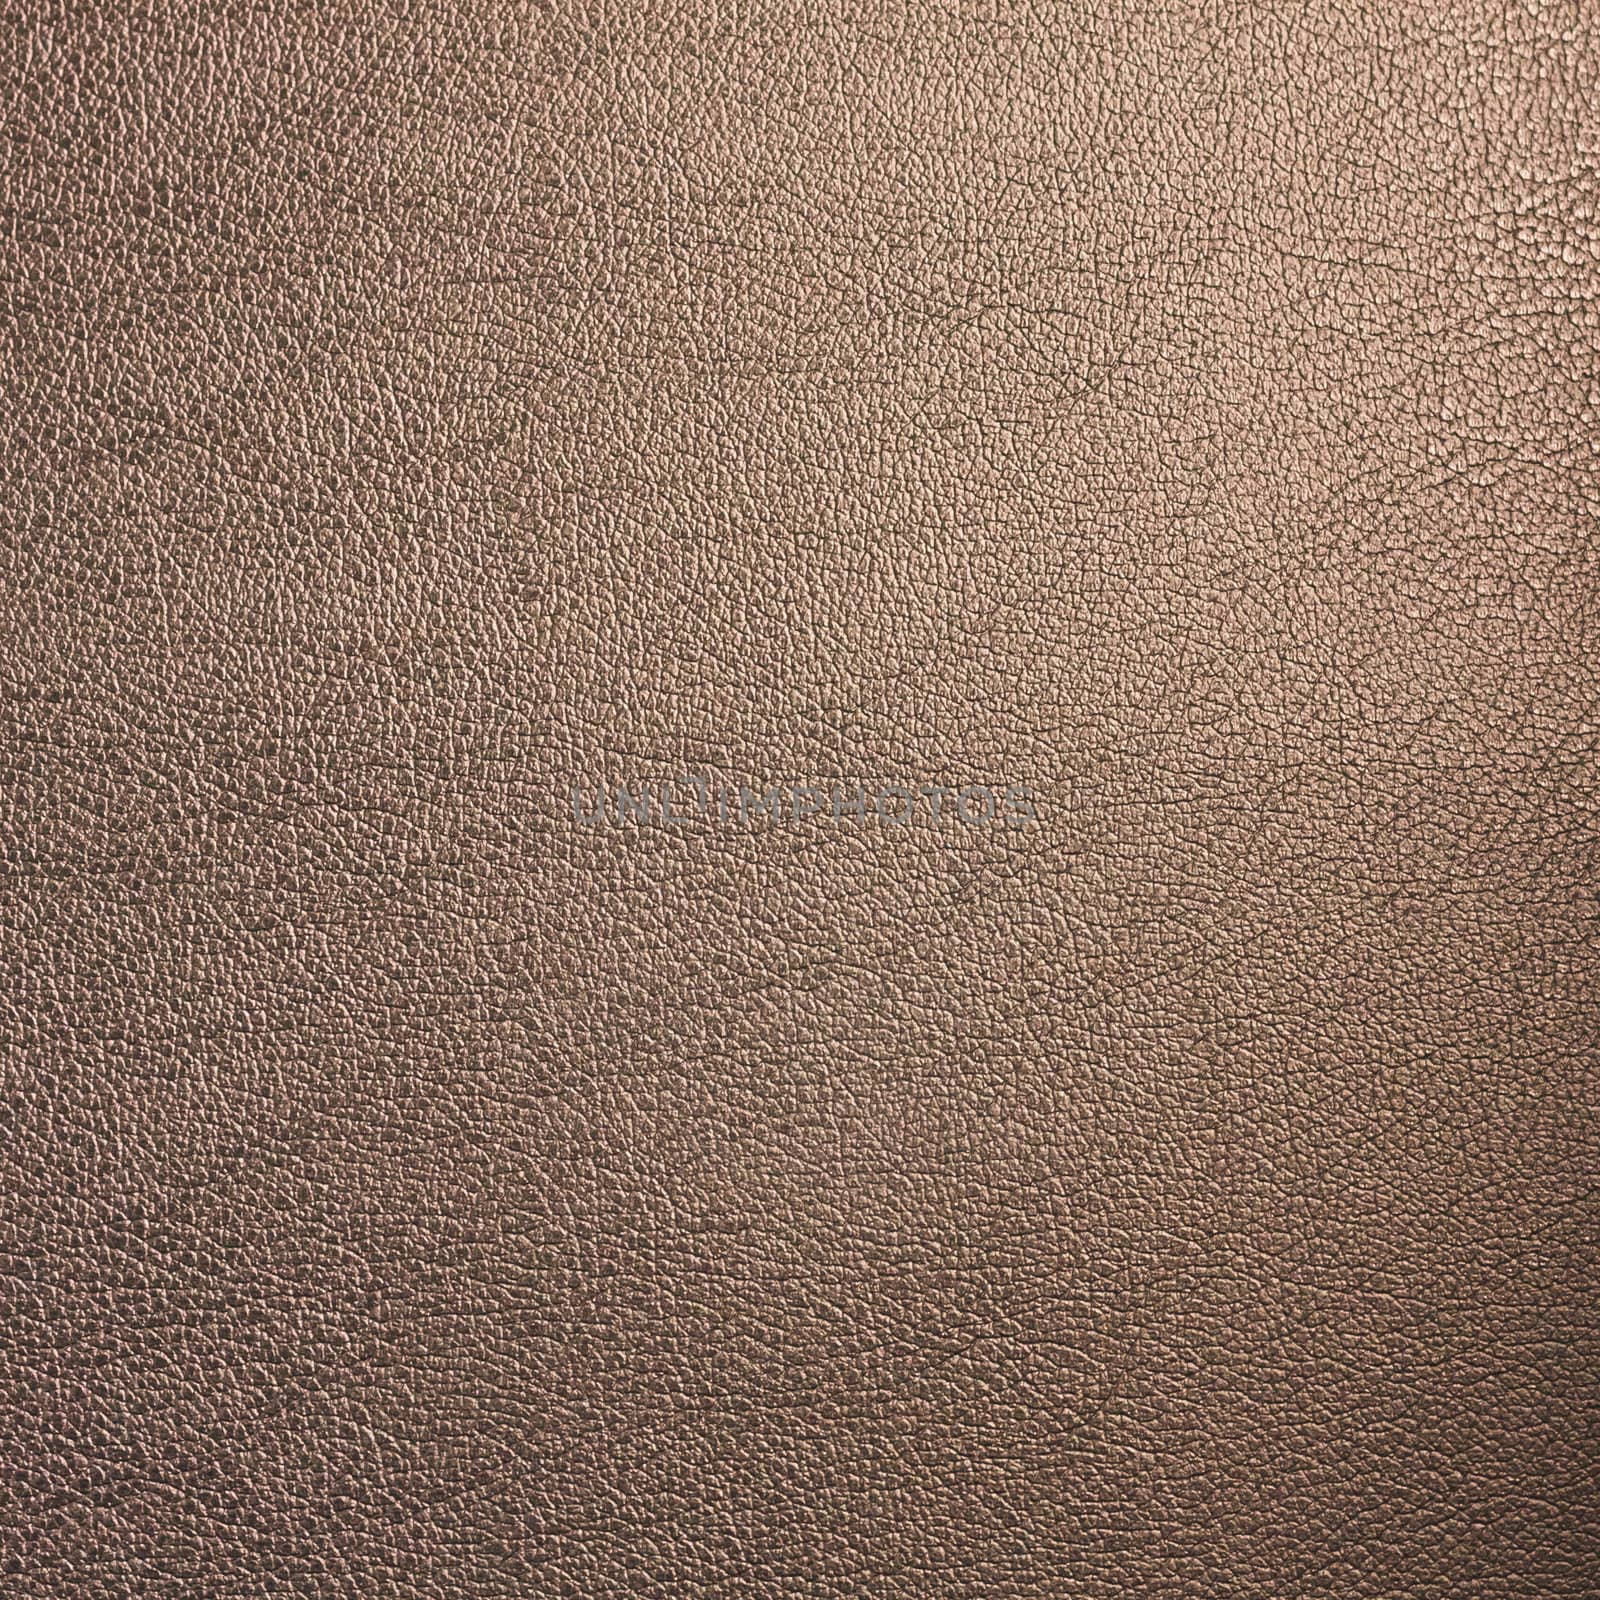 Leather texture made from deer skin